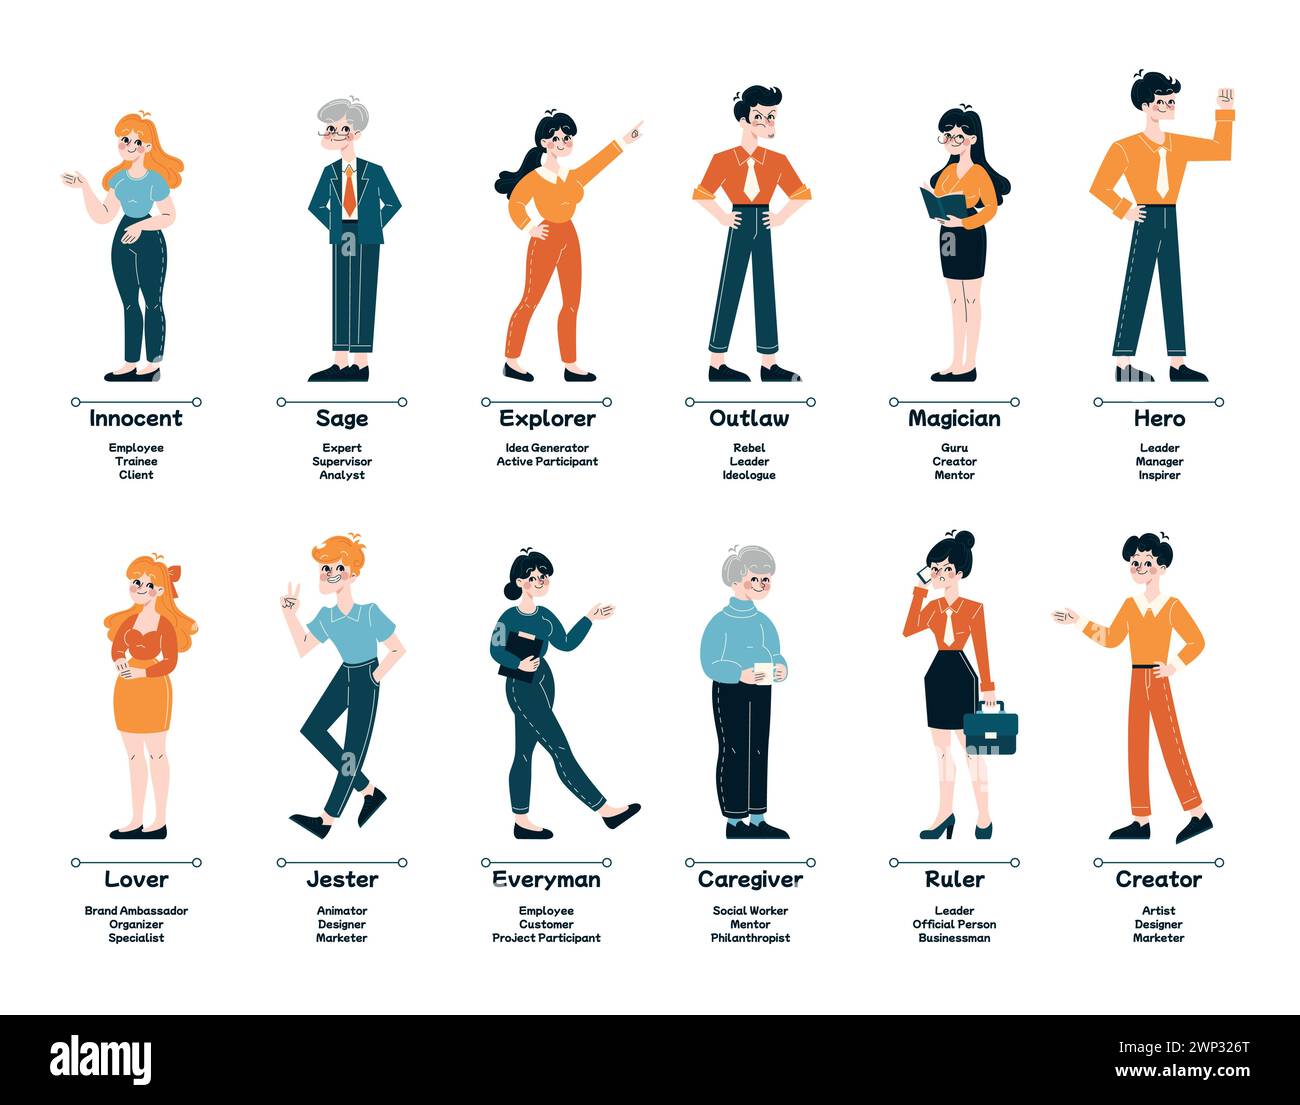 Archetype set. Diverse business personas from Innocent to Creator. Illustrates diverse professional roles. Reflects the diversity of employee characters in the work environment. Flat vector Stock Vector